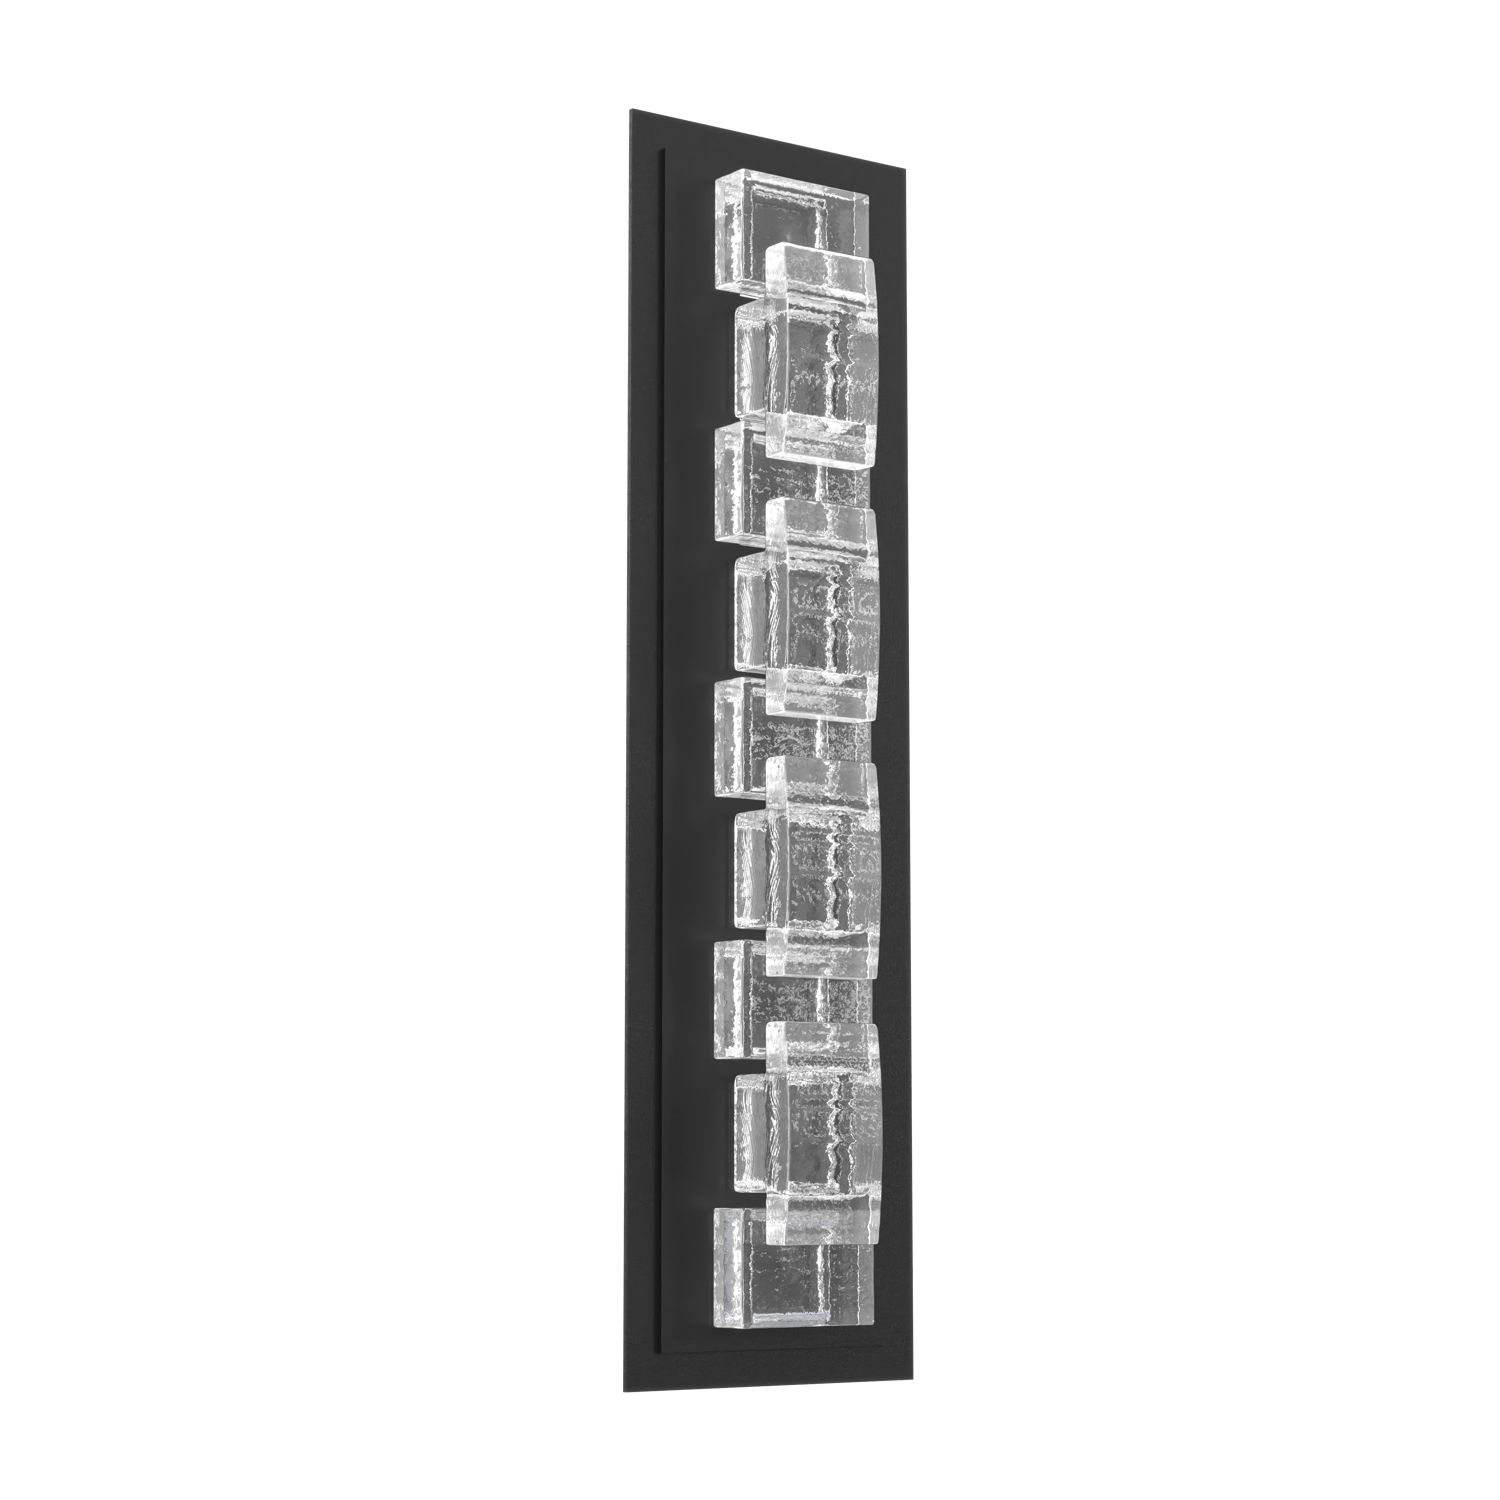 ODB0087-02-TB-TE-Hammerton-Studio-Tessera-28-inch-outdoor-sconce-with-textured-black-finish-and-clear-tetro-cast-glass-shade-and-LED-lamping